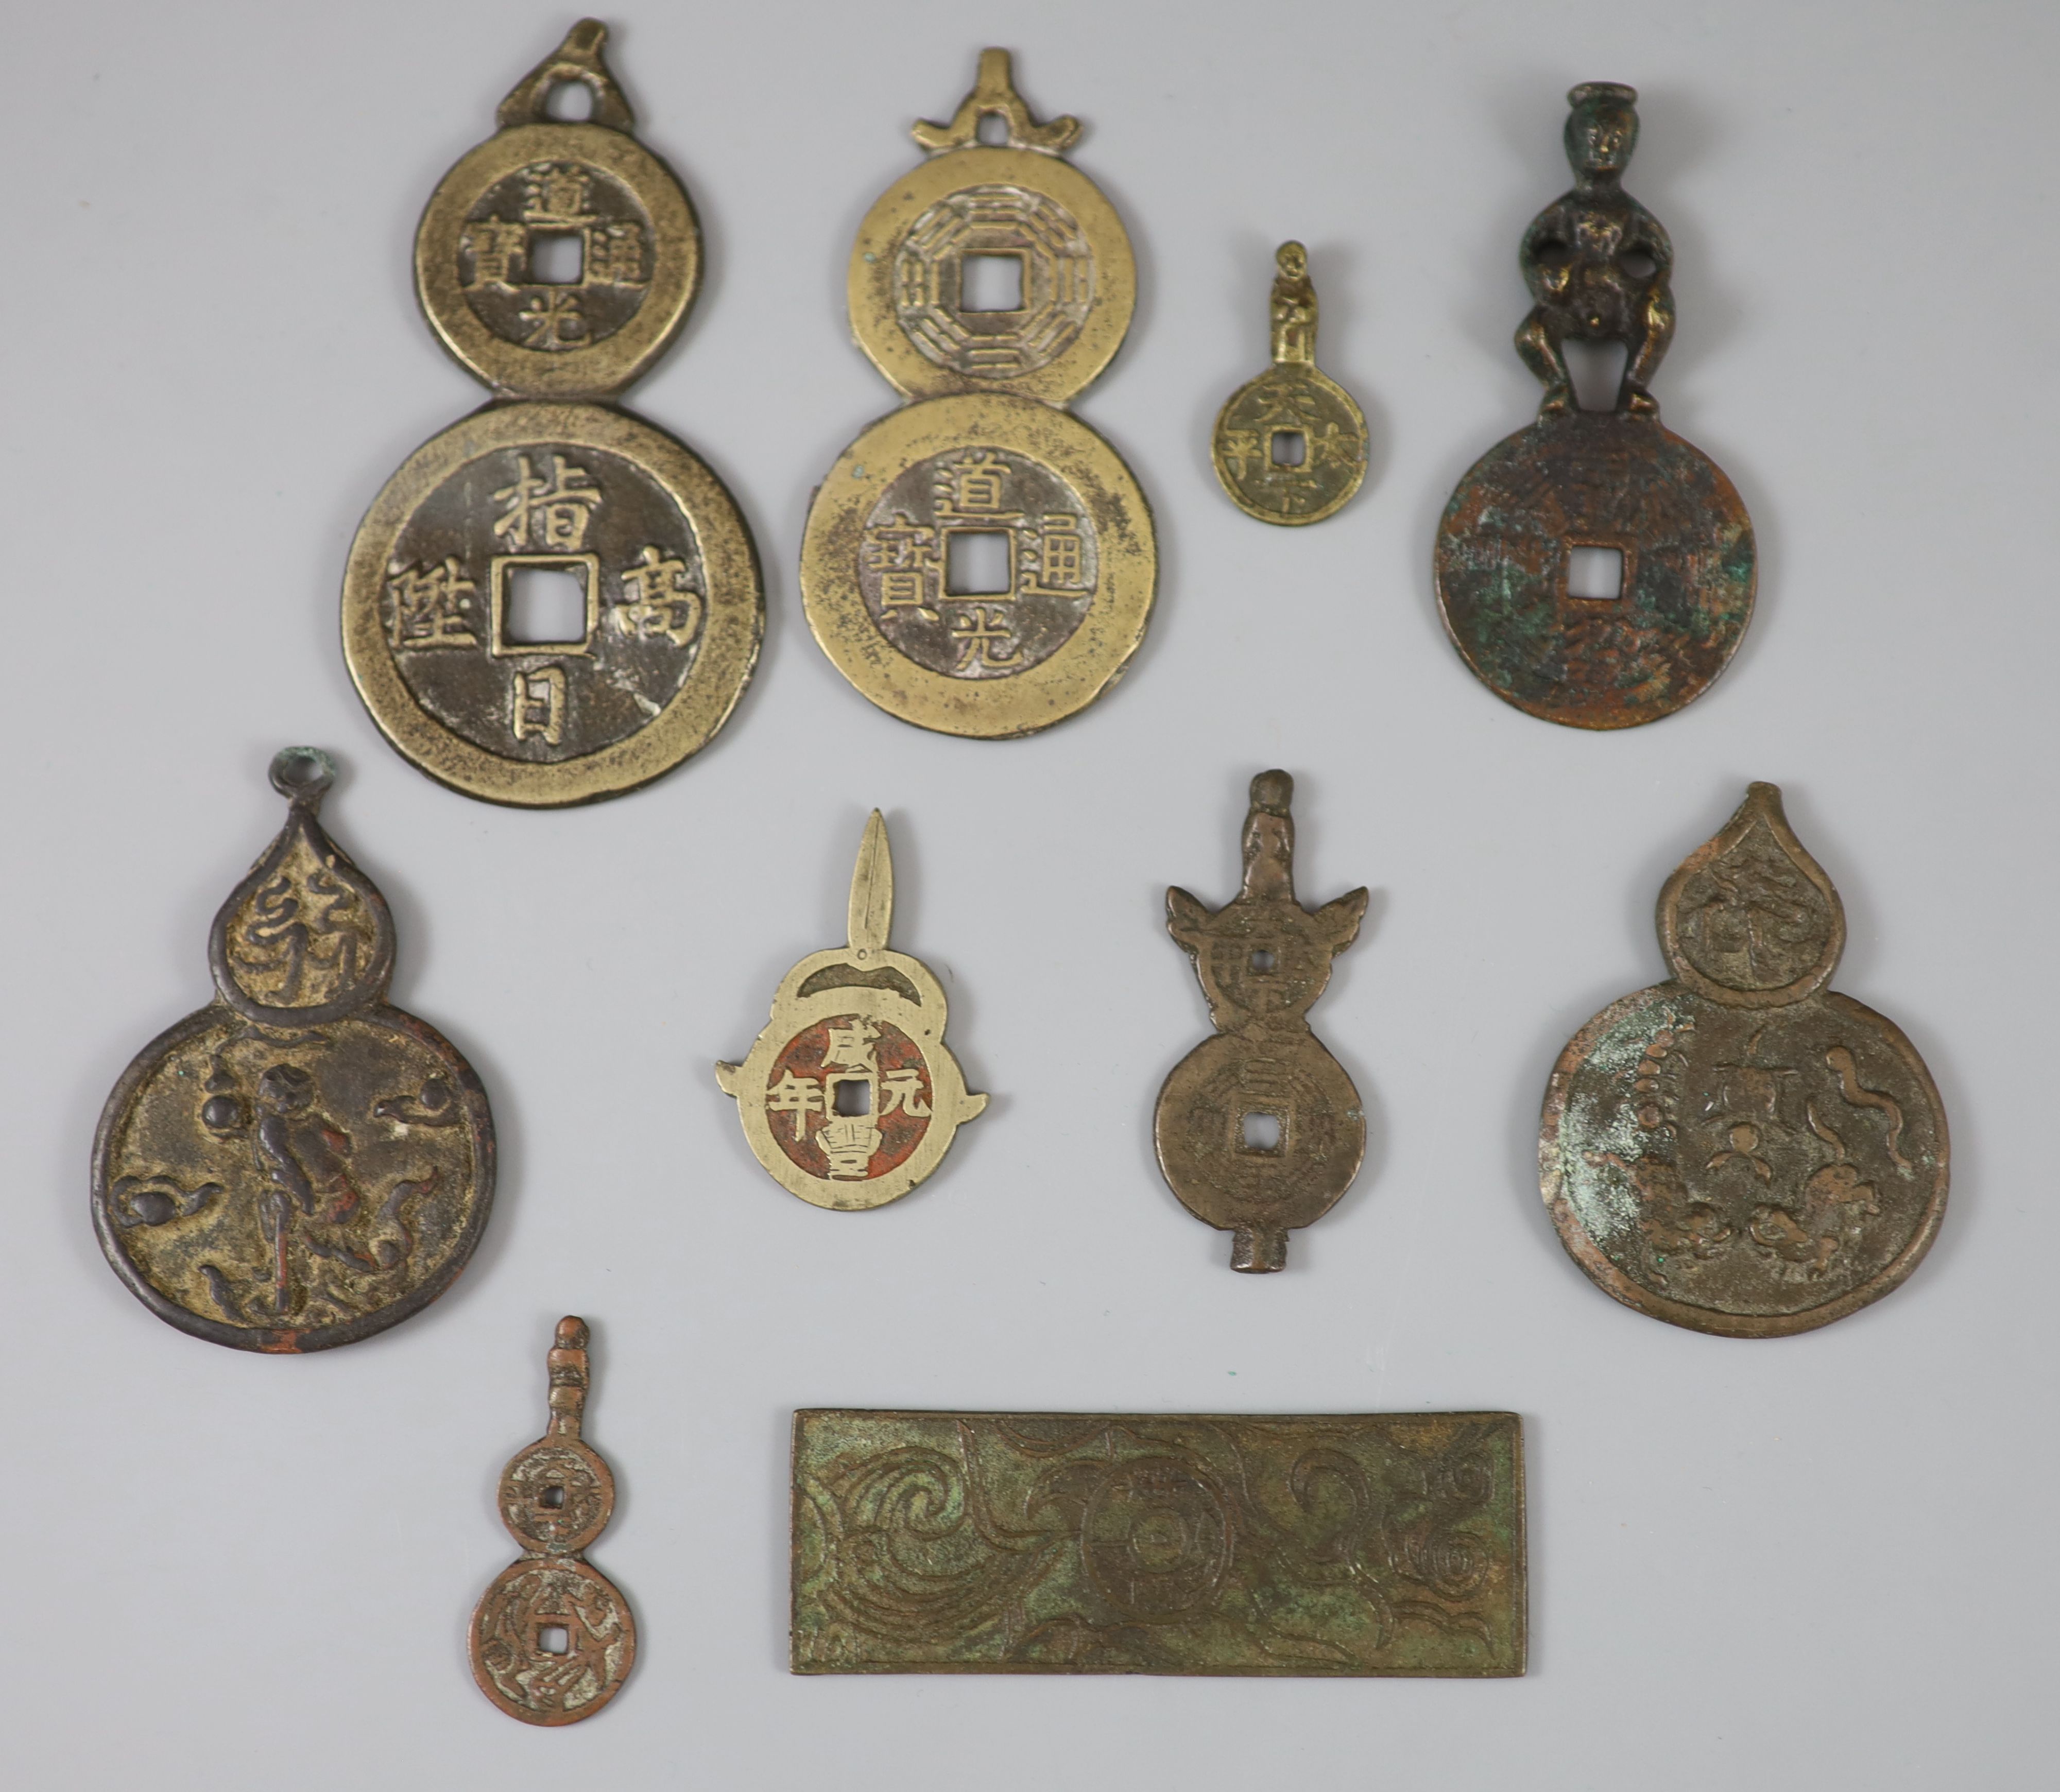 China, 10 bronze charms or amulets, Qing dynasty-Republic period,